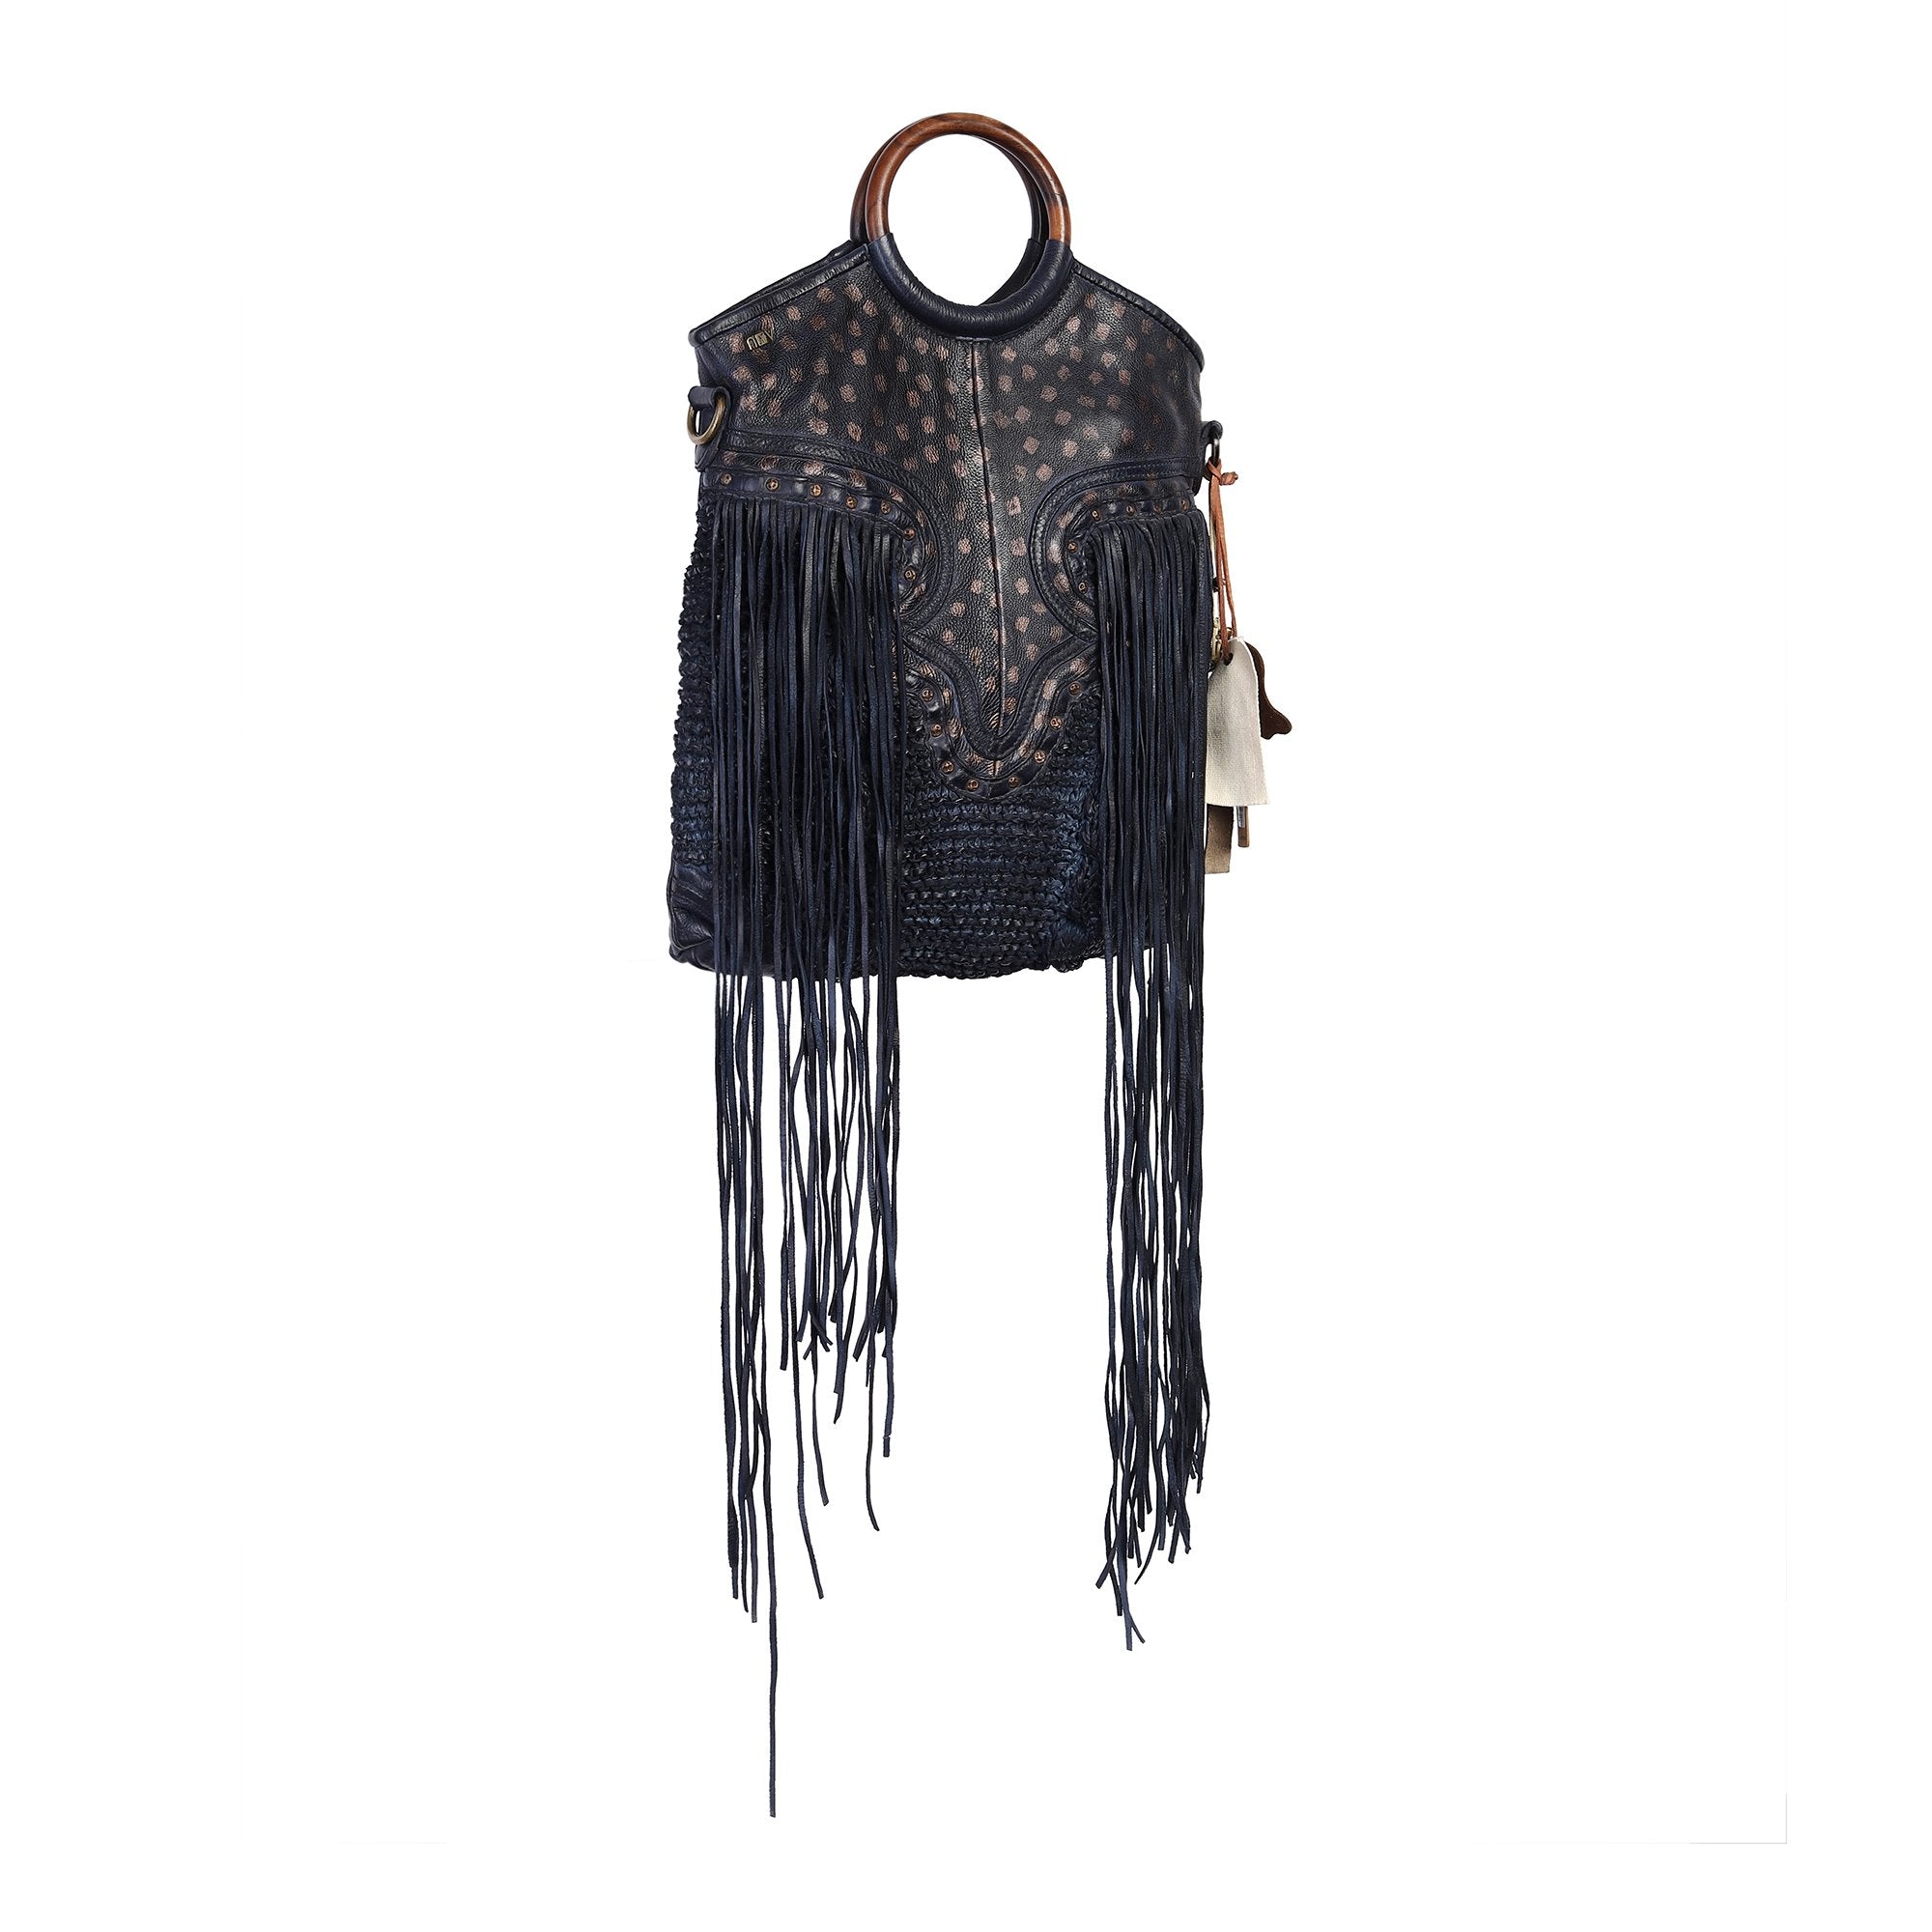 Martinka Designer Bag: Navy blue leather shopper with wooden handle with weaving, fringes and metallic print by Art N Vintage